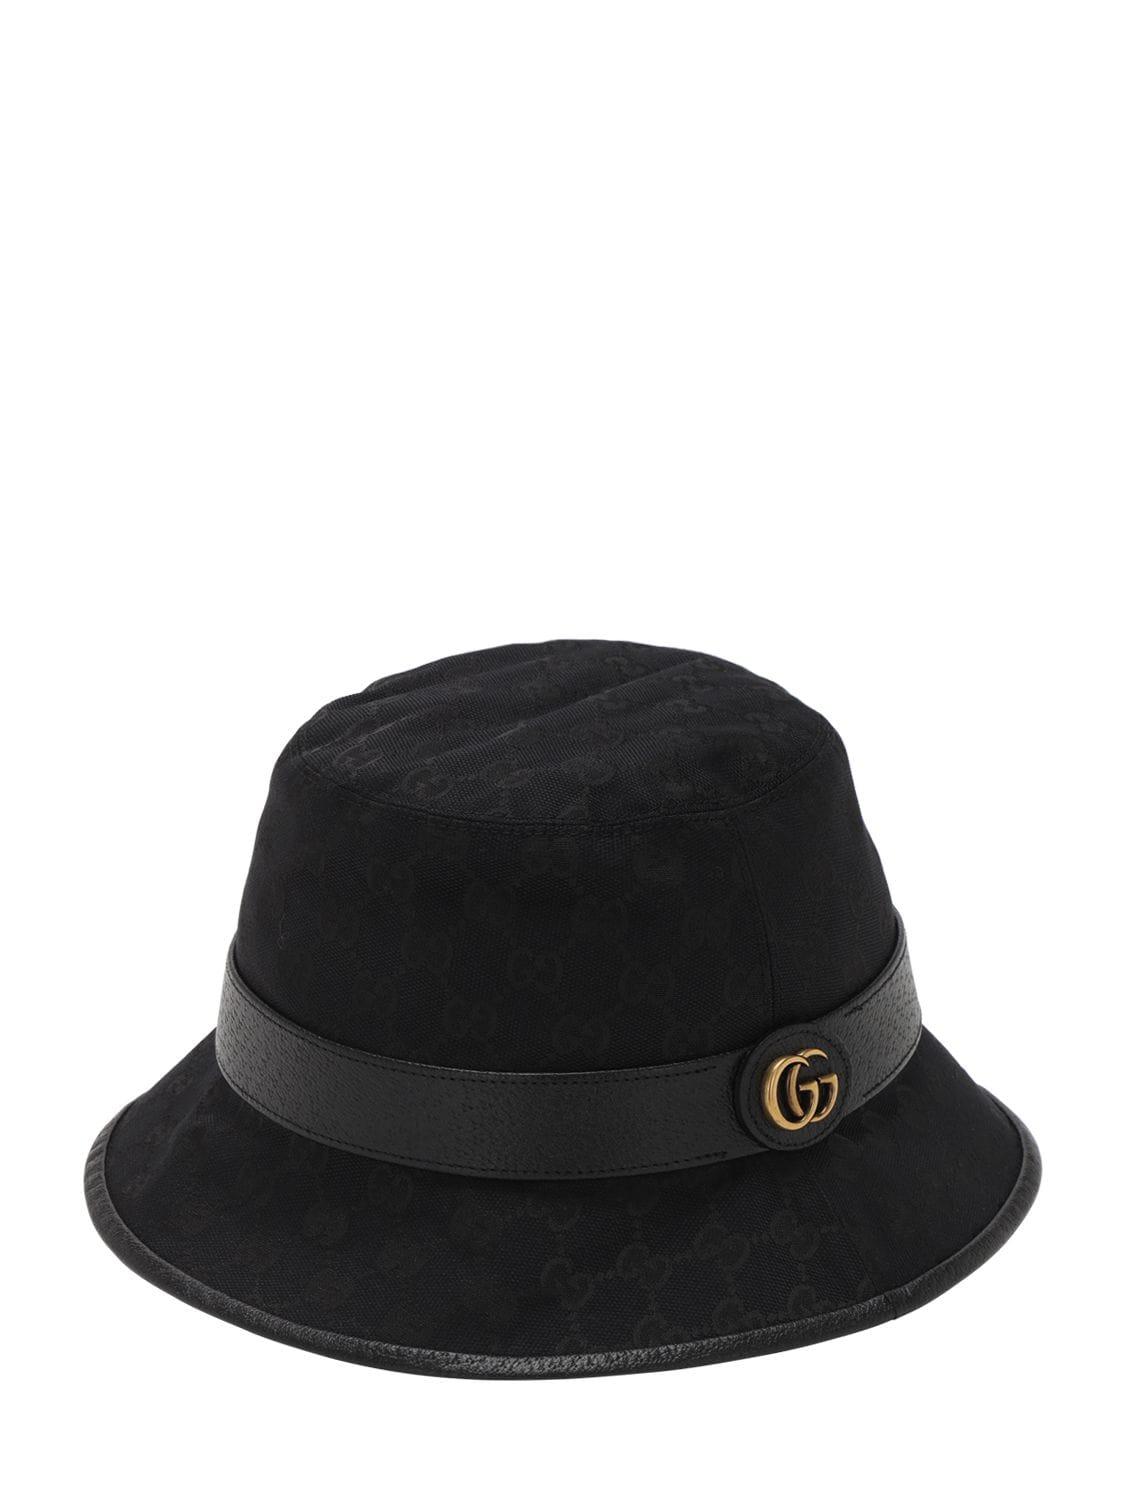 Gucci Gg Cotton Canvas Bucket Hat in Black for Men - Lyst